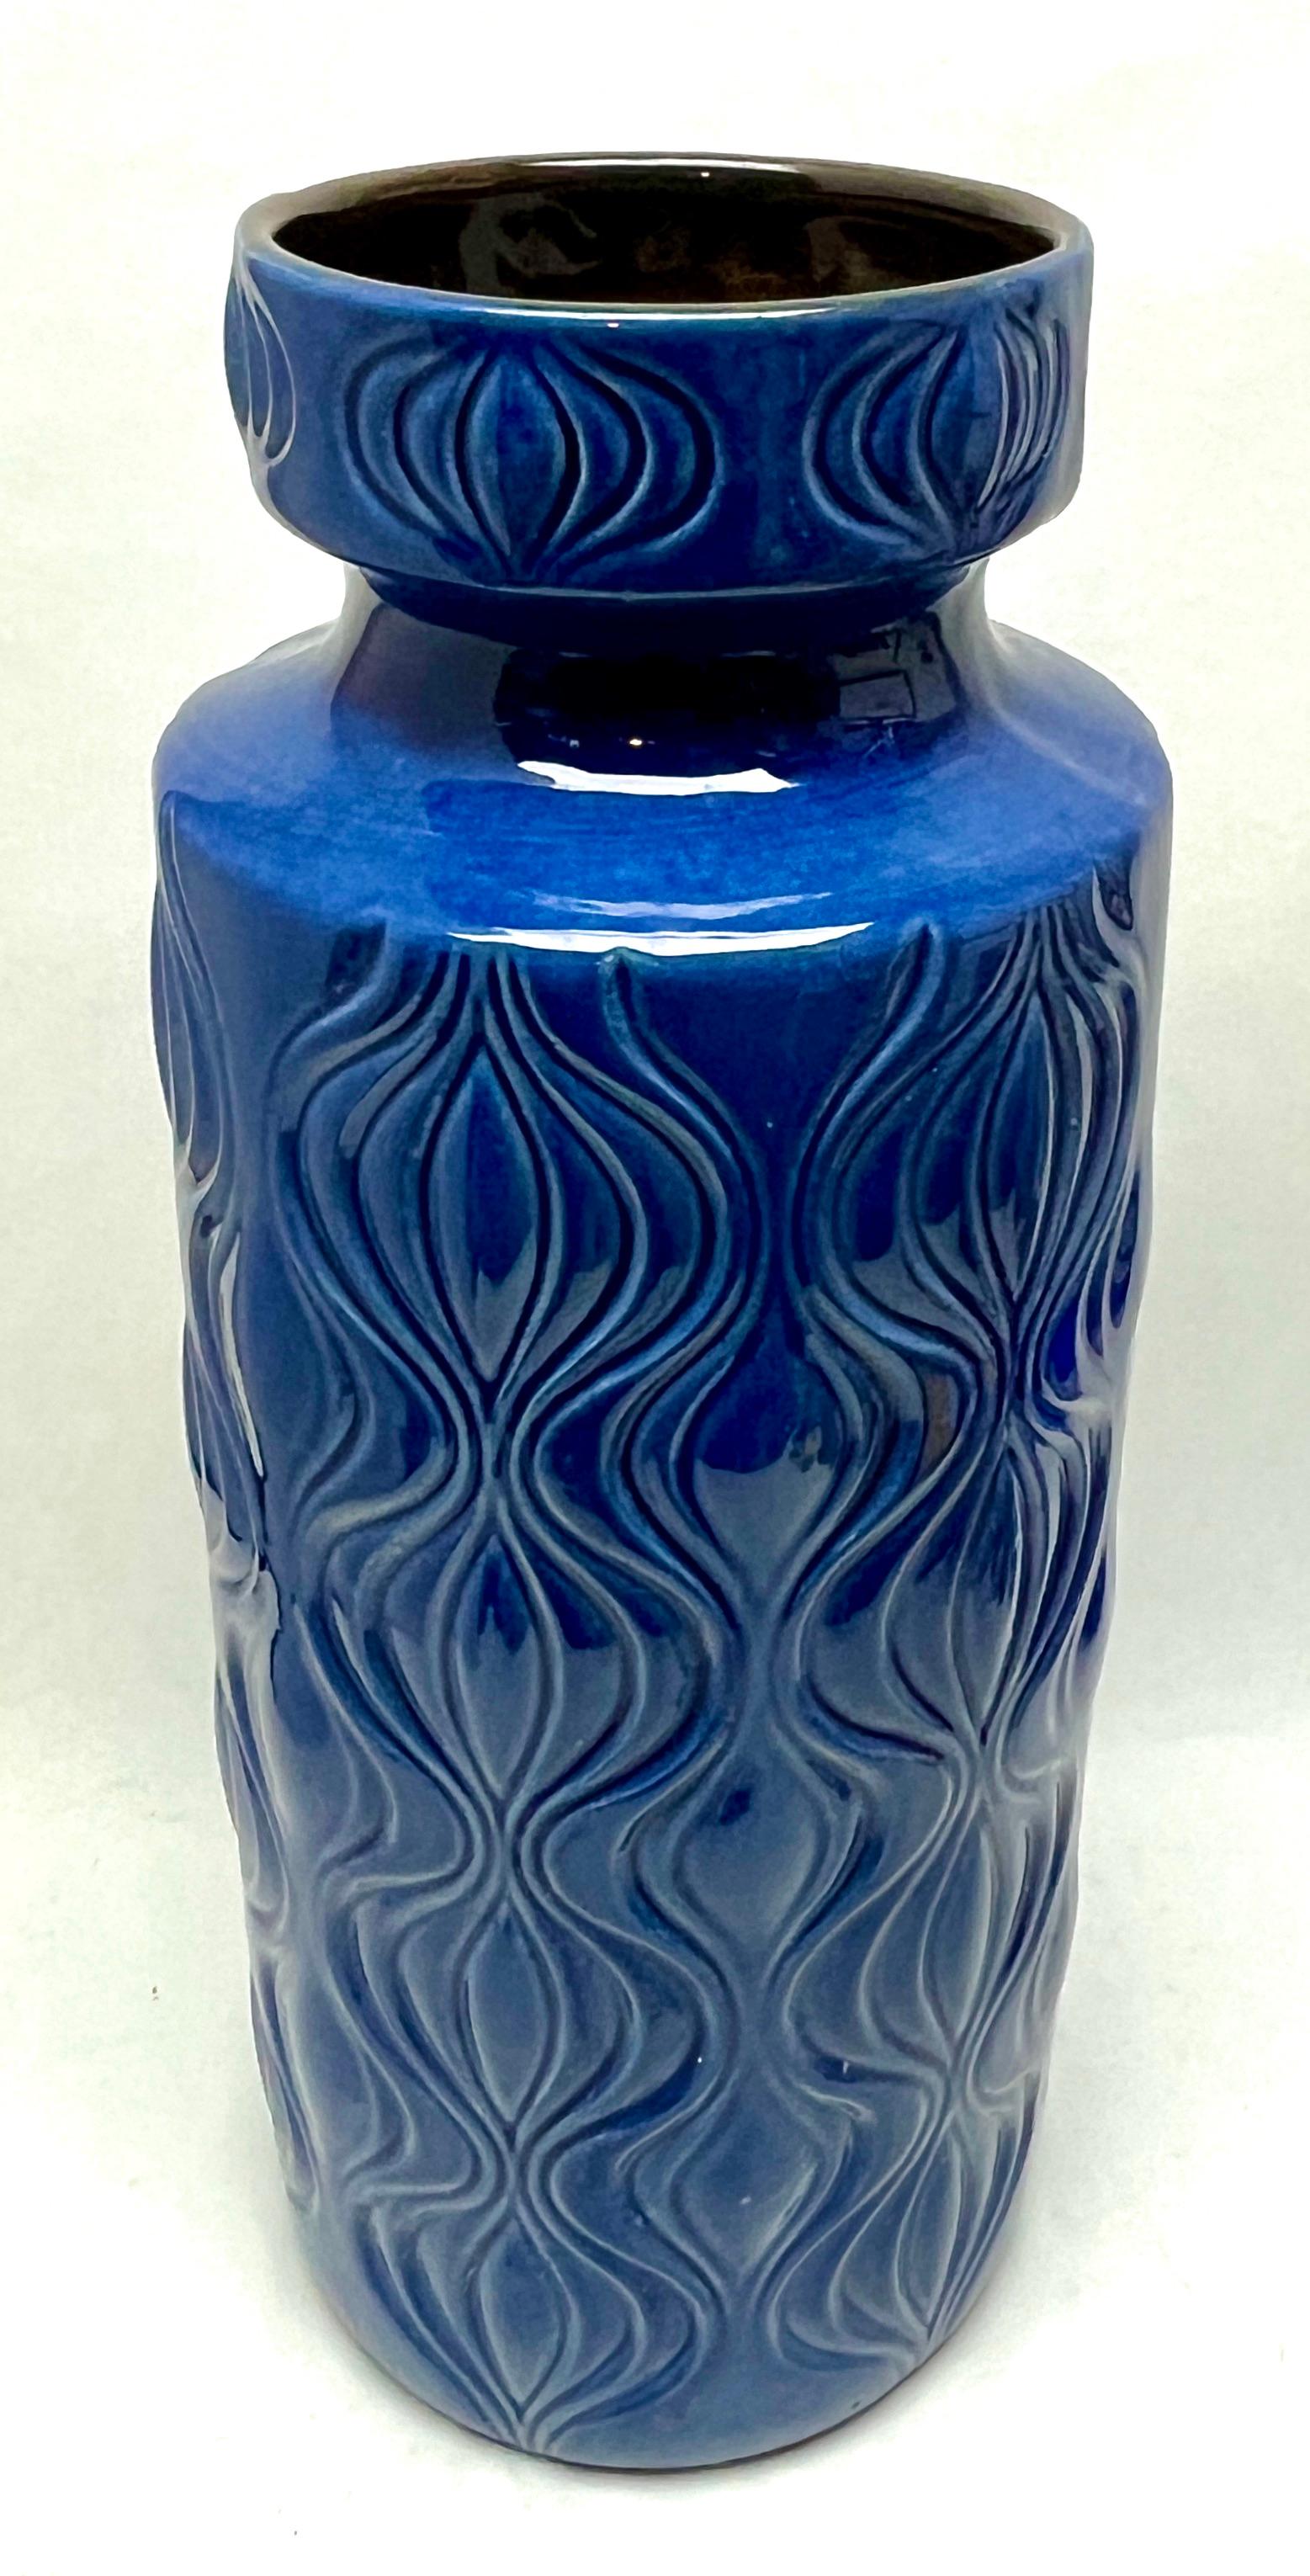 'Amsterdam' floor vase 'Scheurich, Blue Model 285-40' W-Germany, 1960s

Blue satin finish ('half gloss') W-Germany, 1960s.
with impressed design 'Amsterdam', inspired by the central canal systems of the Dutch capital as reflected in the water of